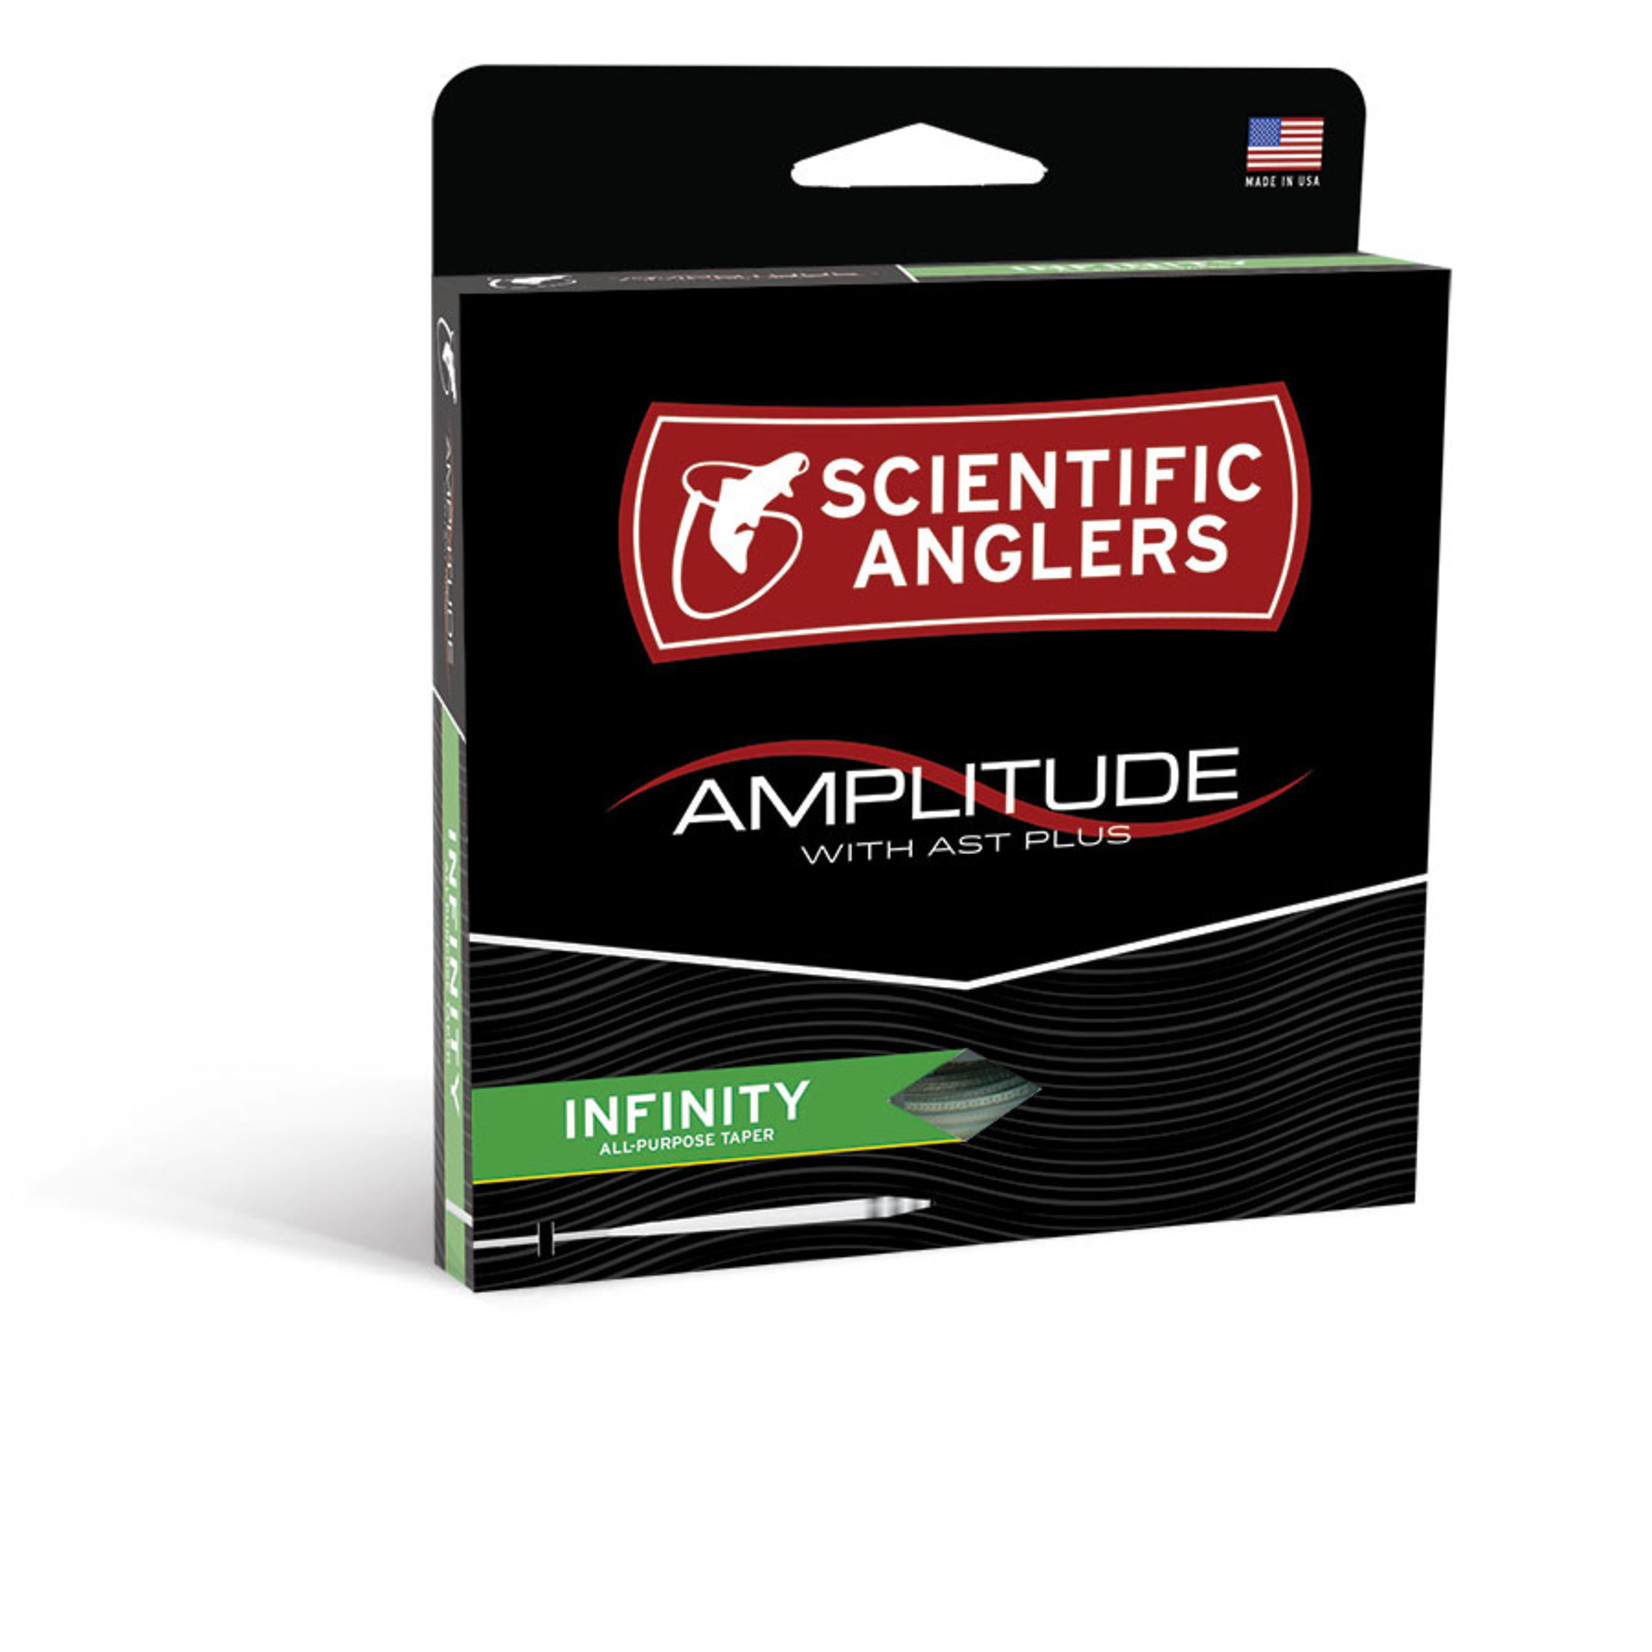 SCIENTIFIC ANGLERS SA AMPLITUDE INFINITY Textured Fly Line